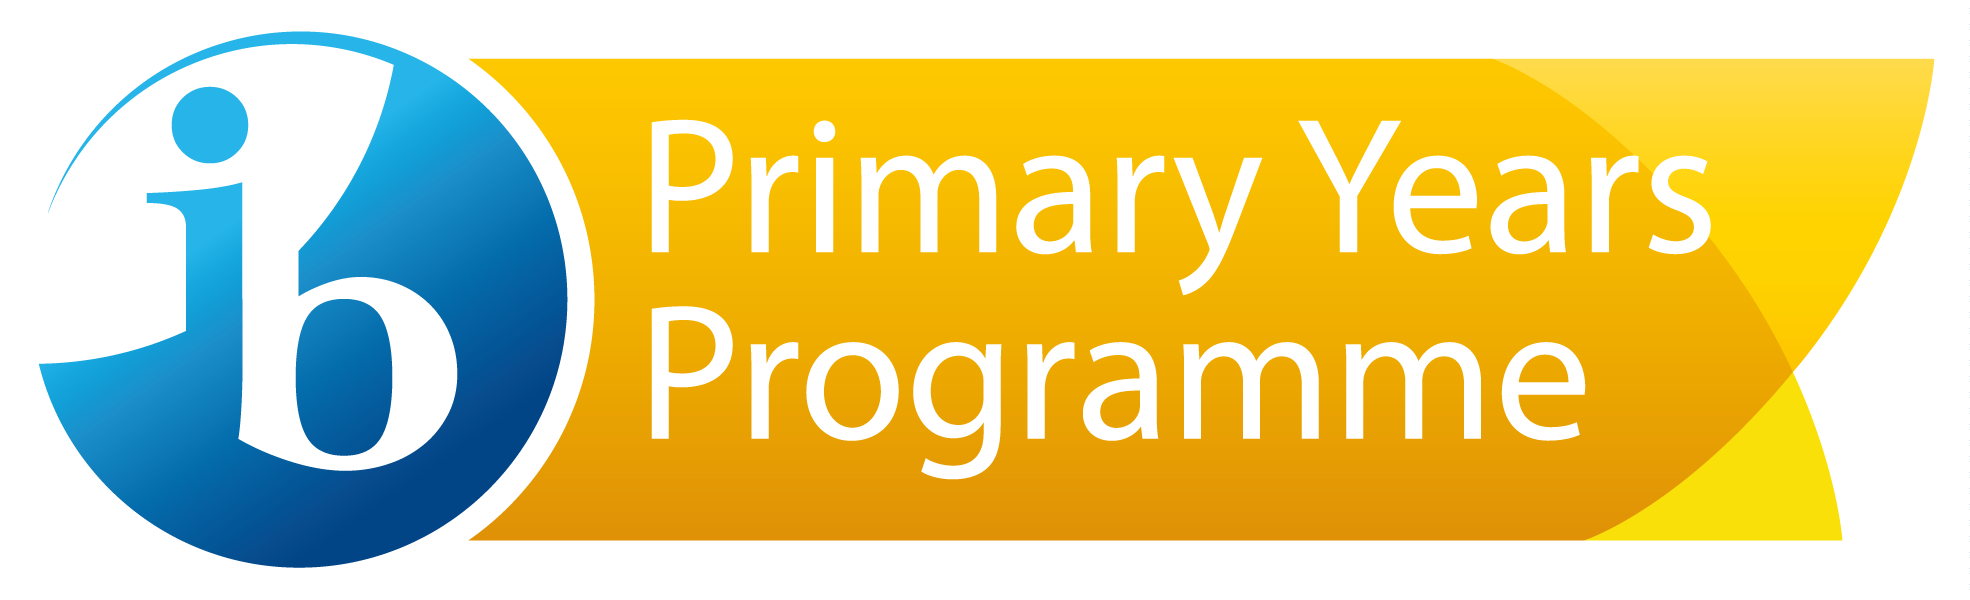  Primary Years Programme (PYP) - International Bac